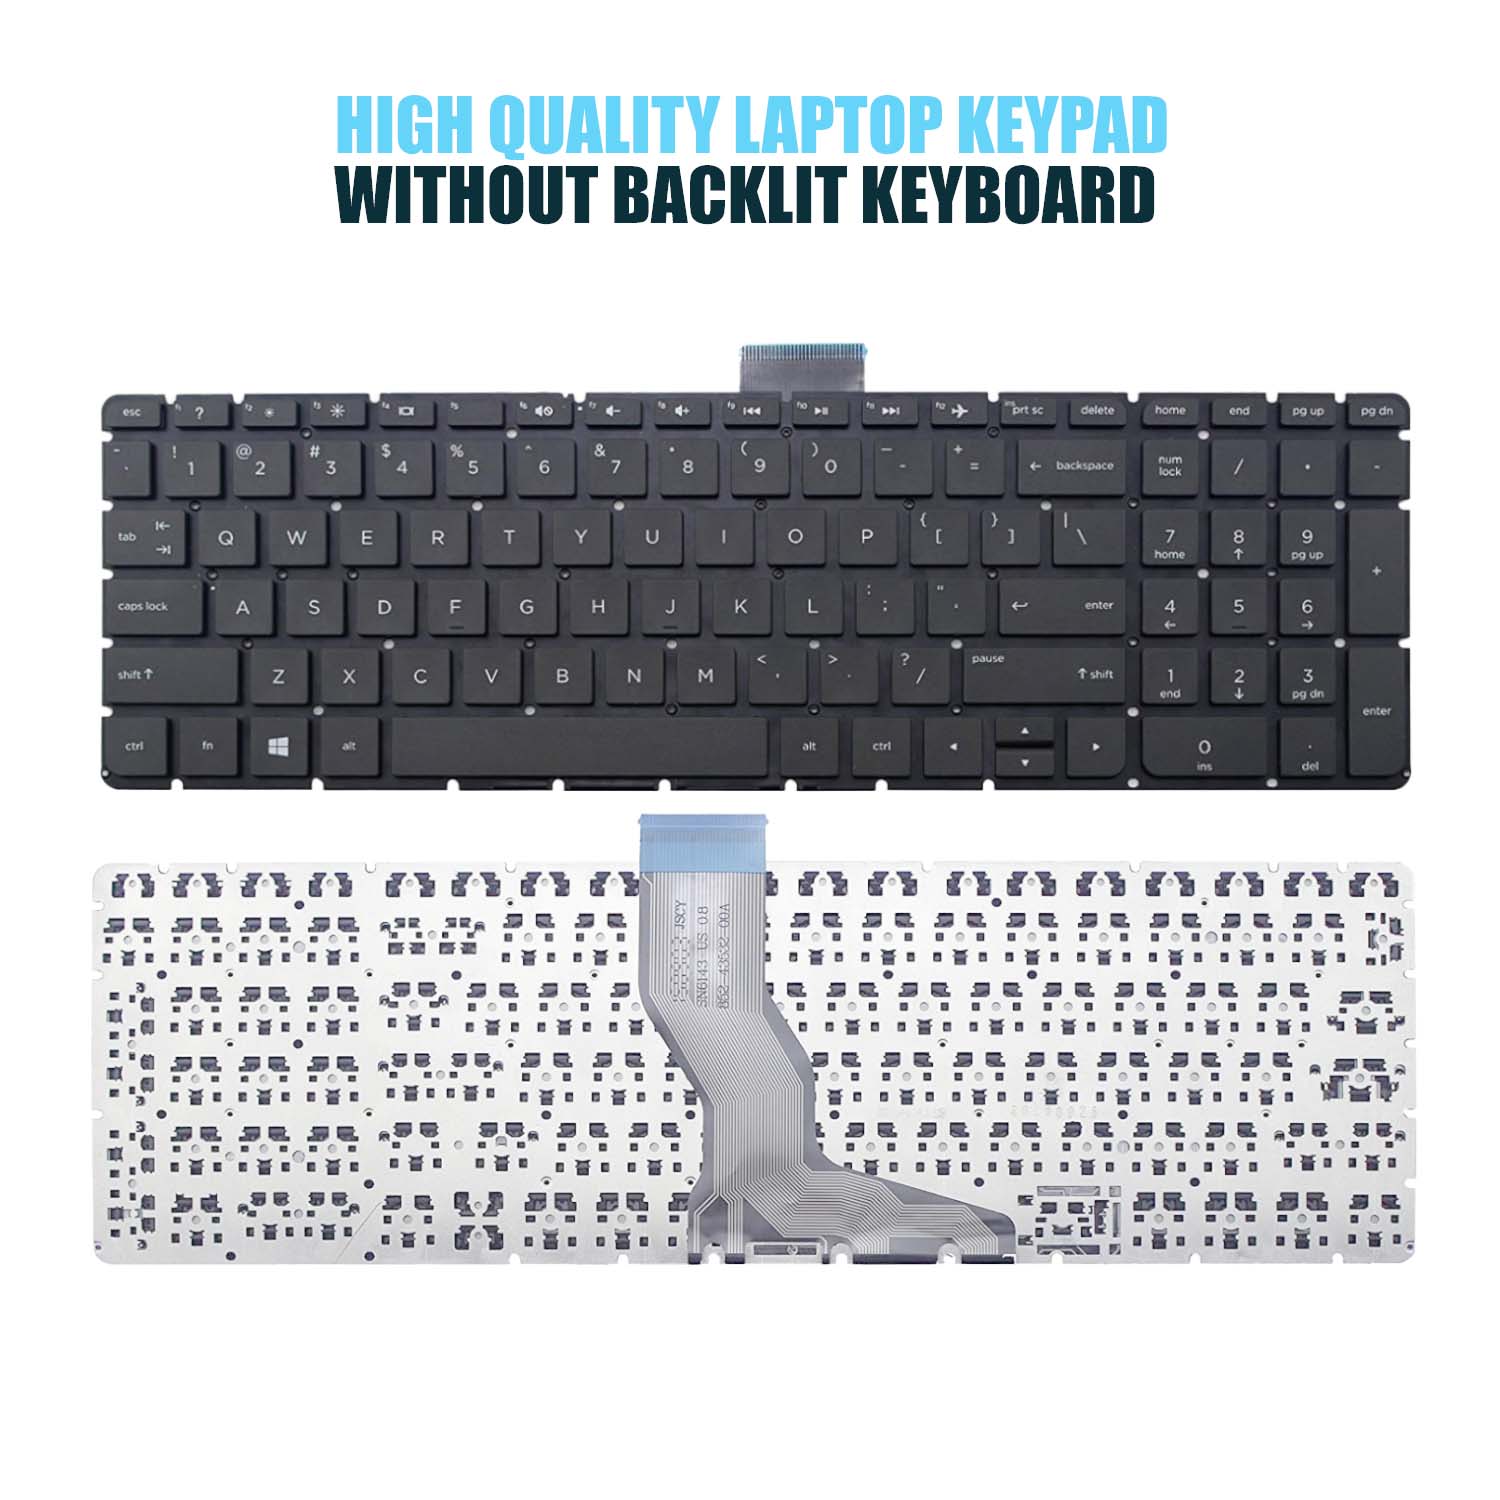 HP 15-bs Without Backlit Laptop Keyboard